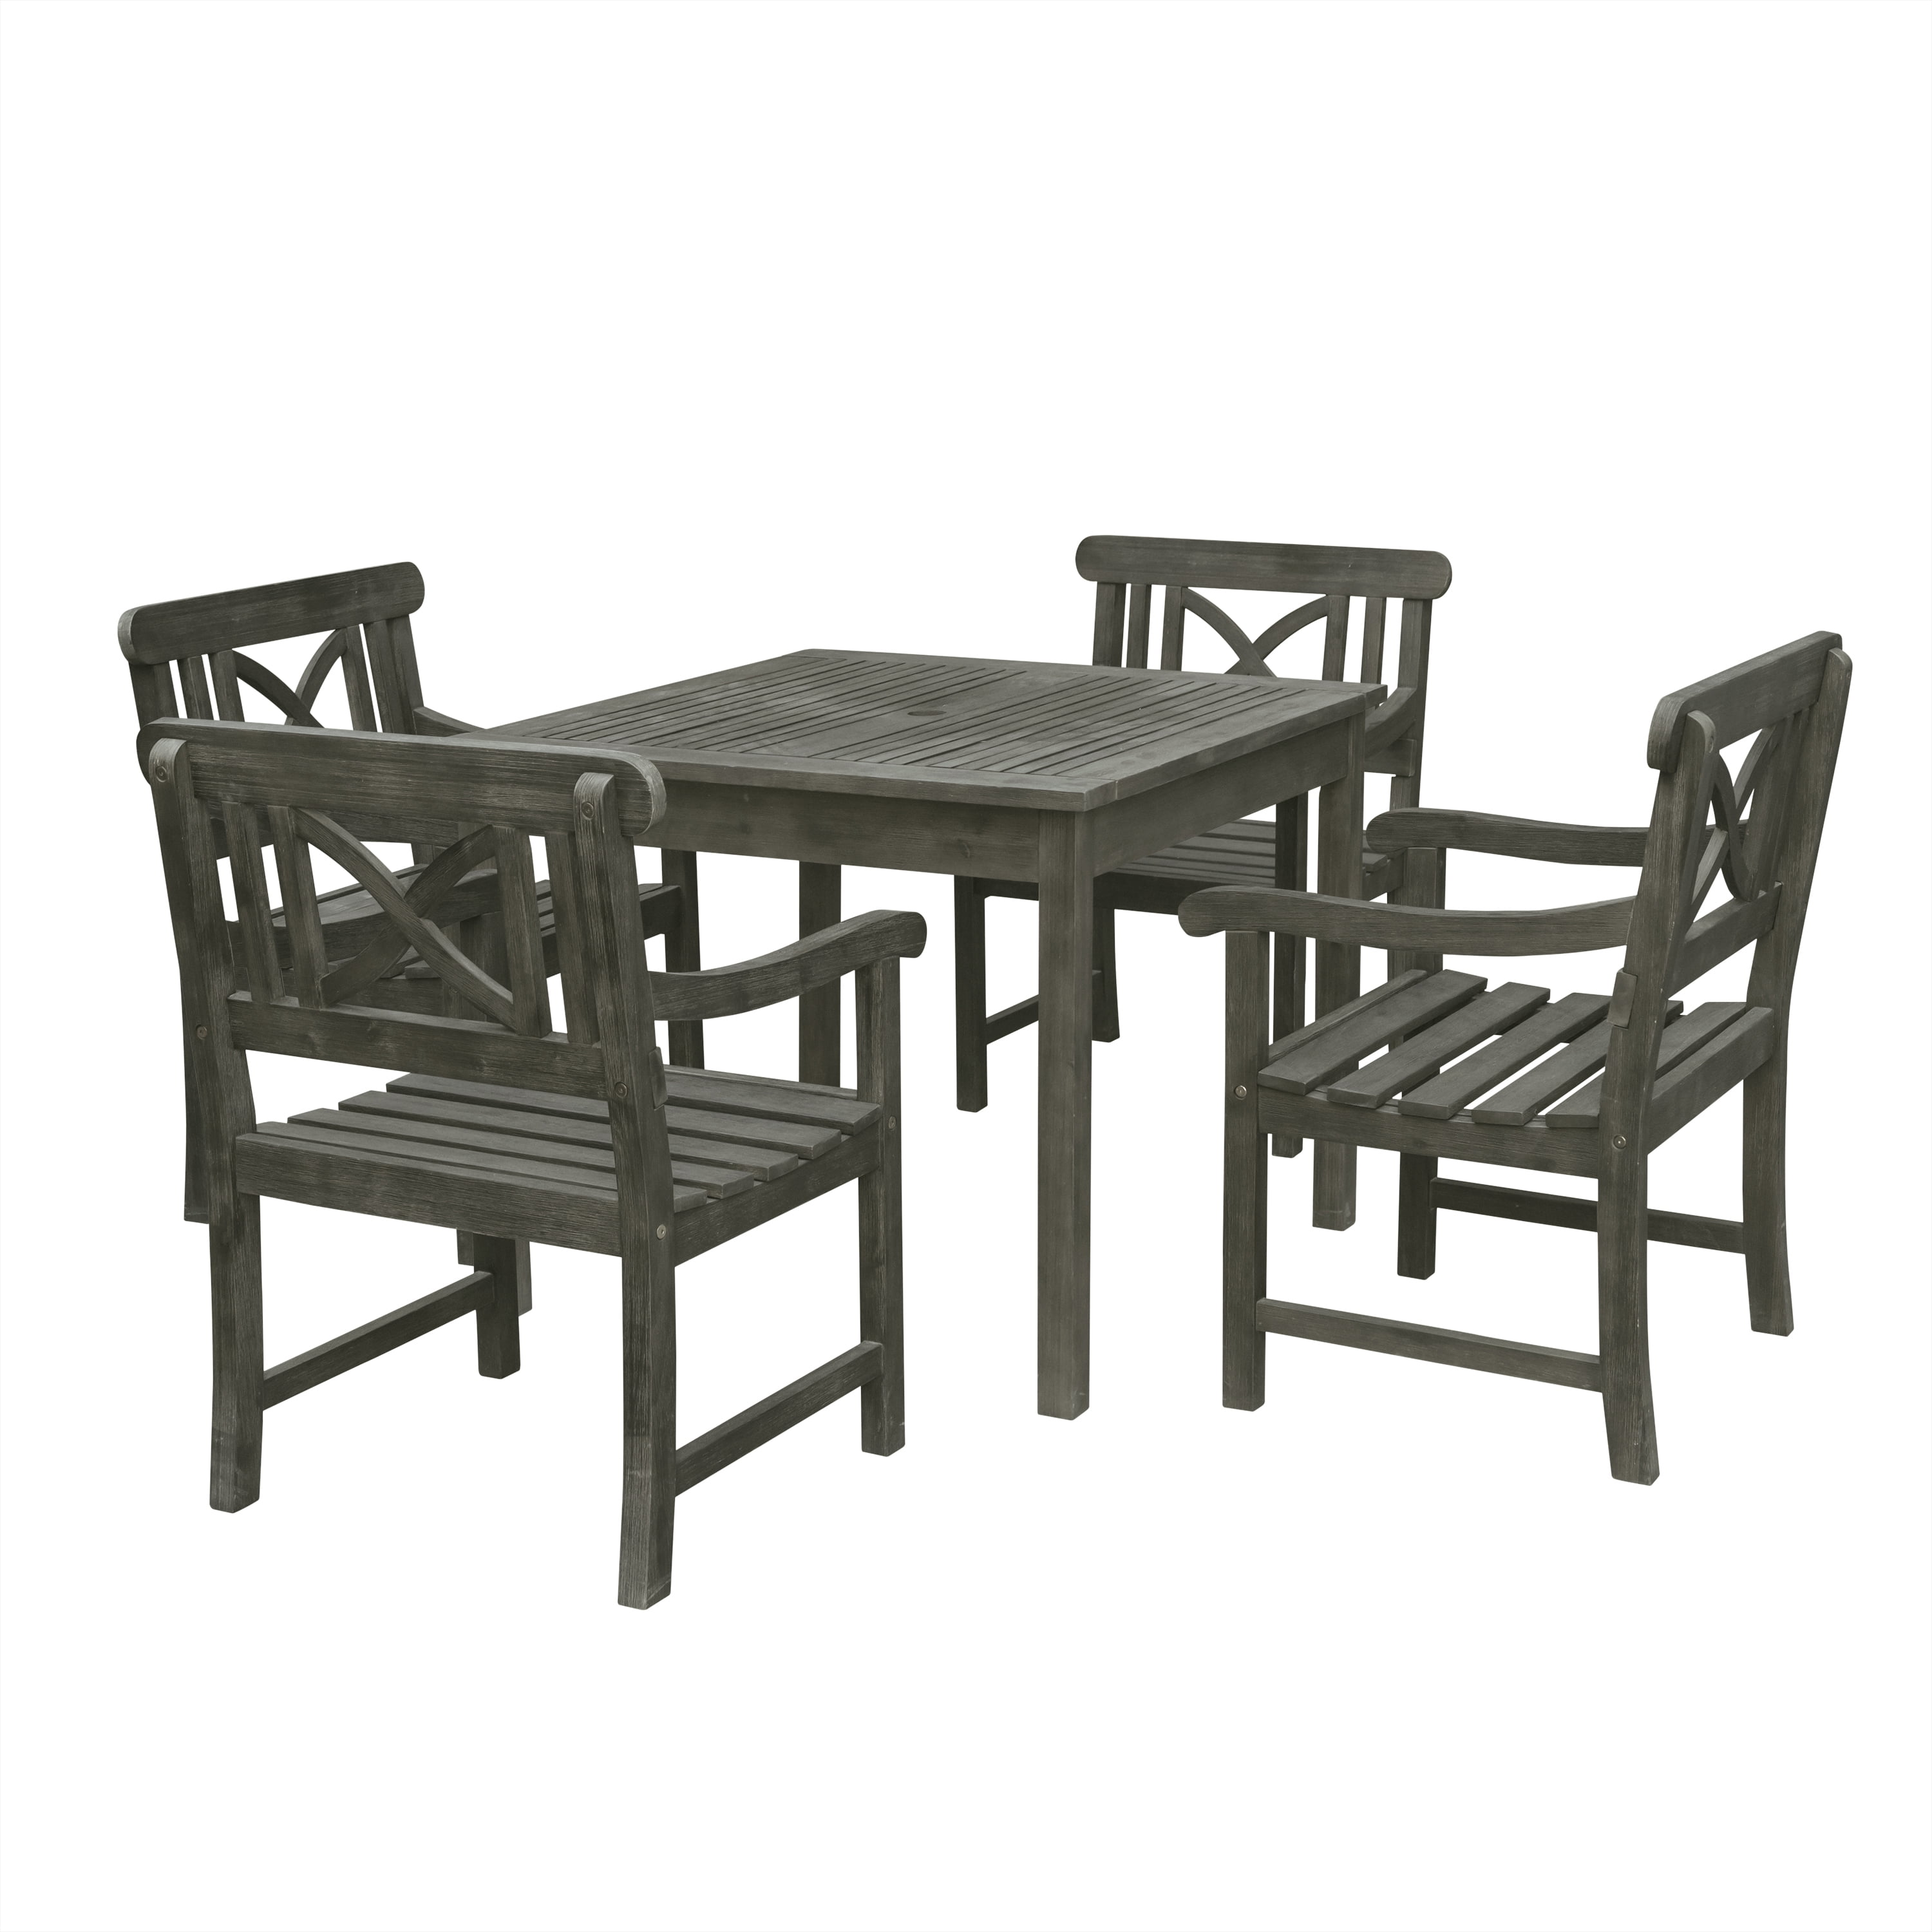 Renaissance Outdoor 5-piece Wood Patio Stacking Table Dining Set